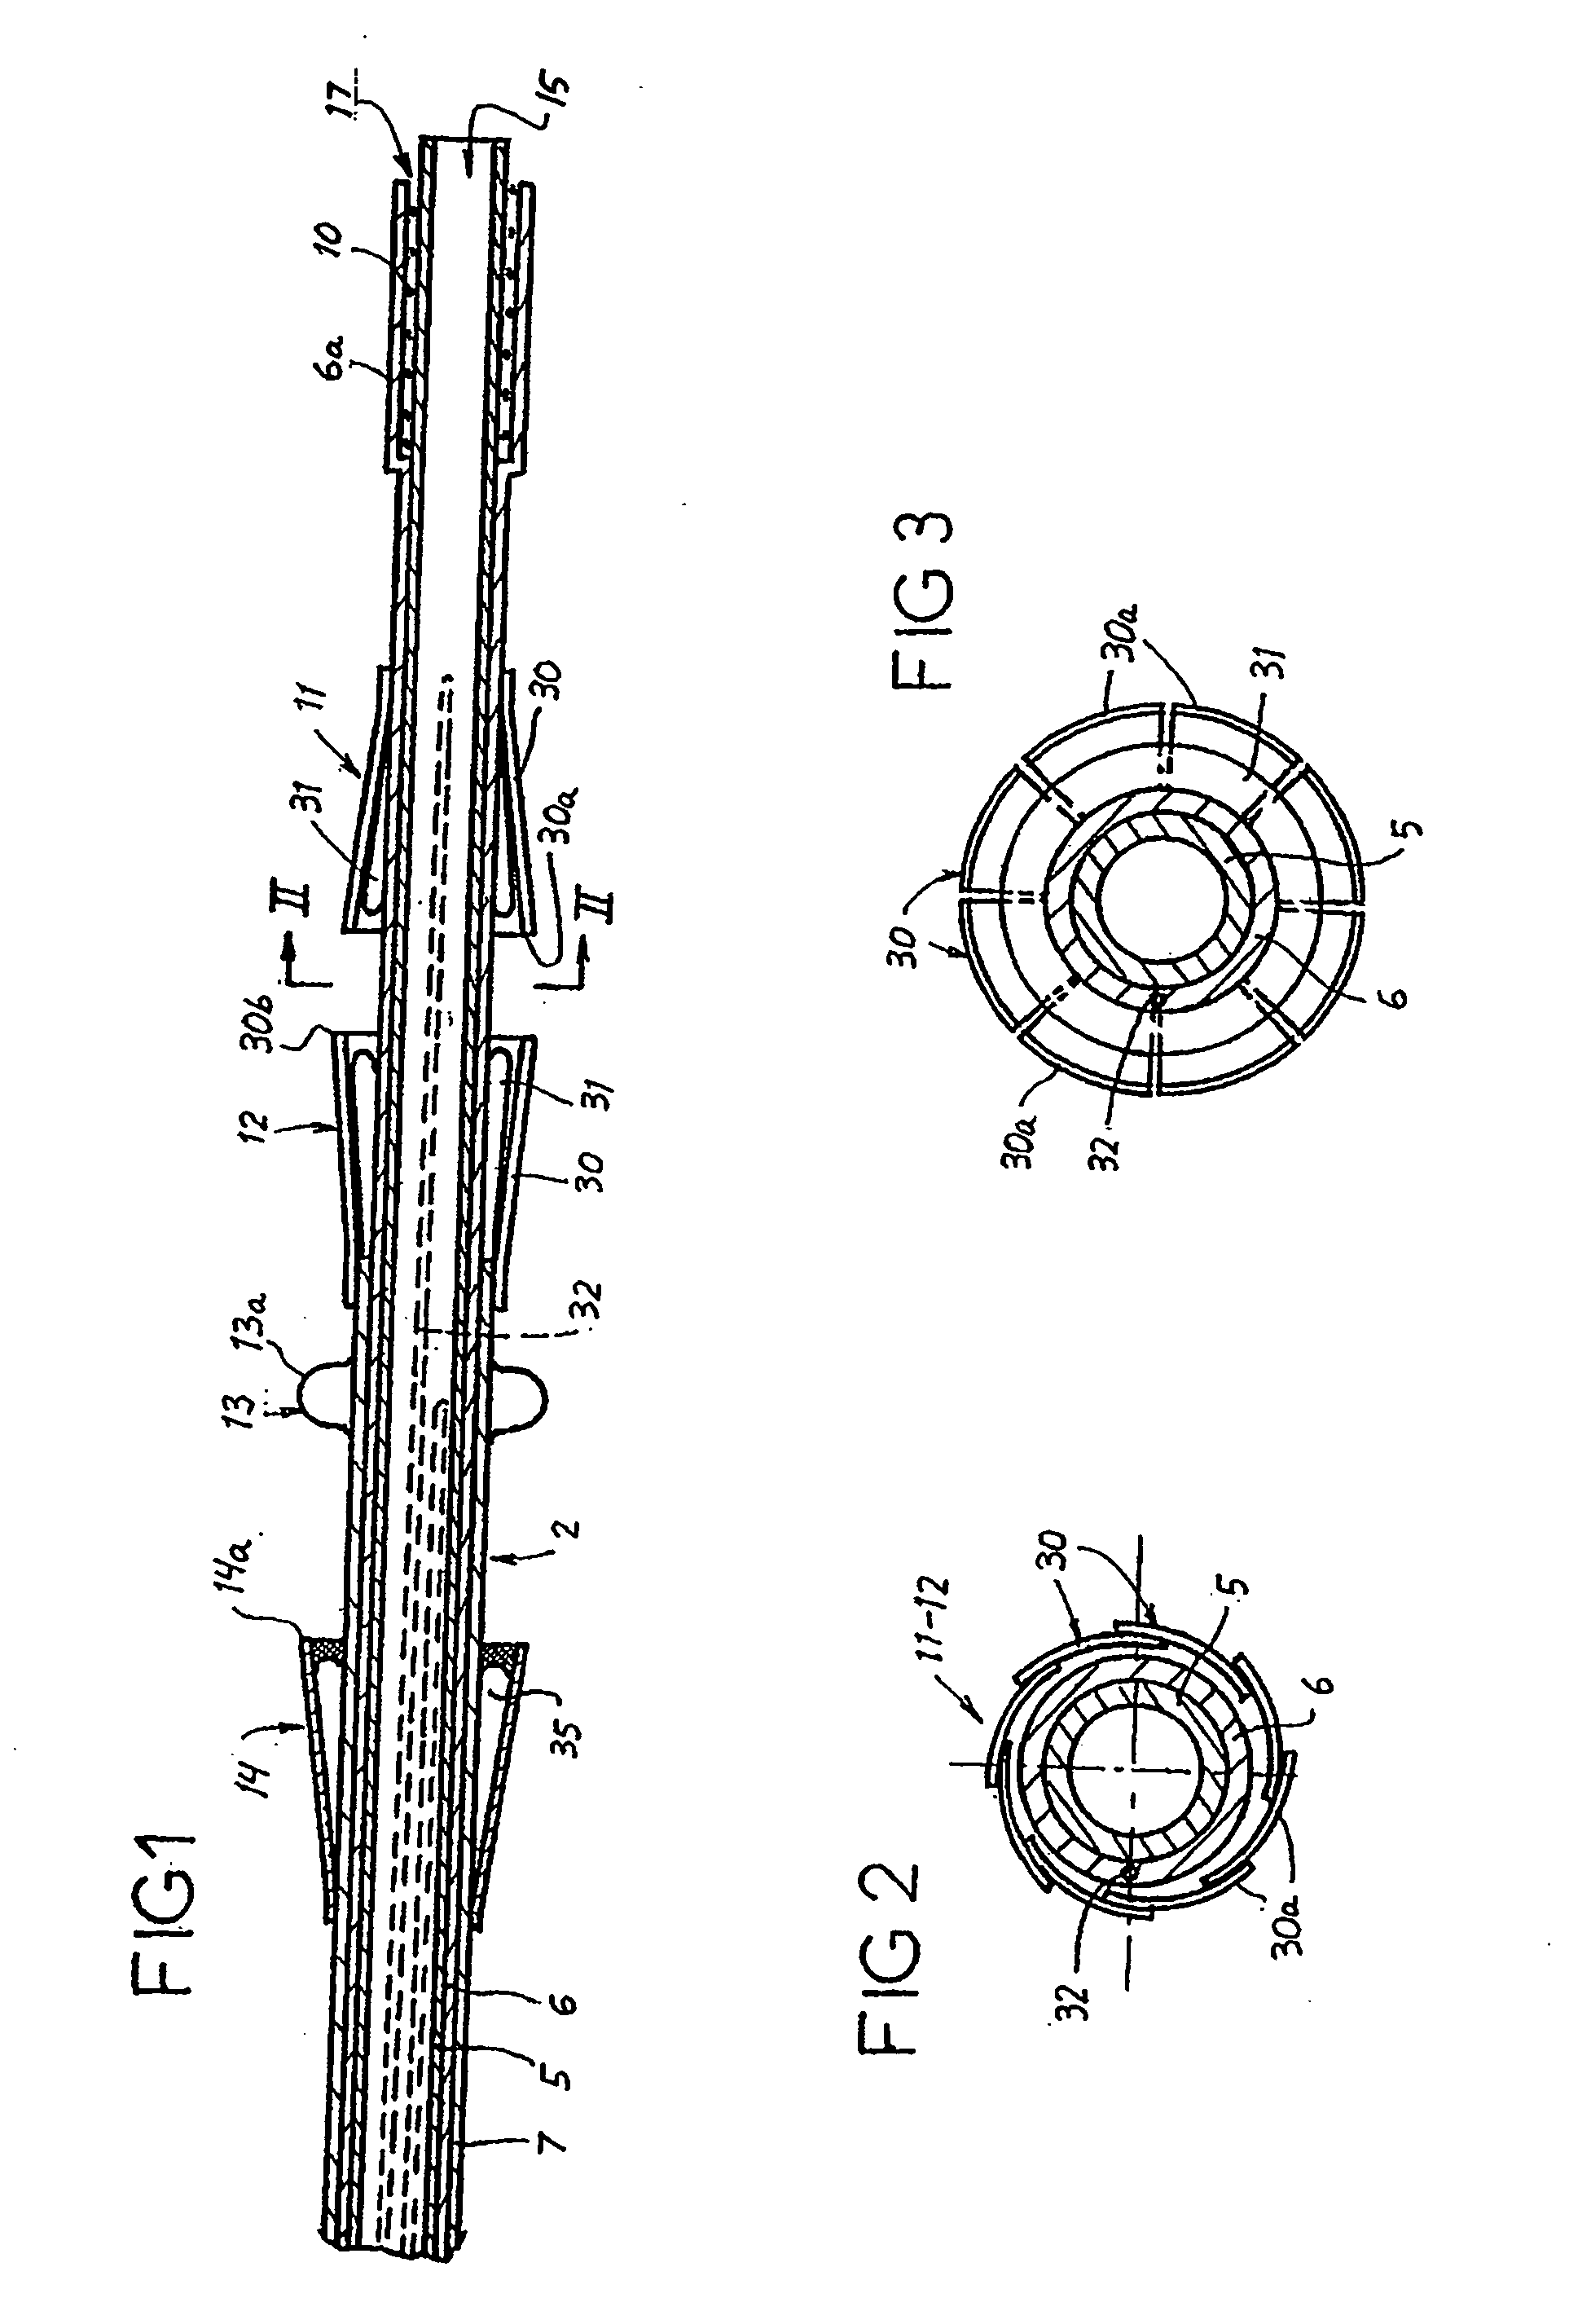 Non-cylindrical prosthetic valve system for transluminal delivery